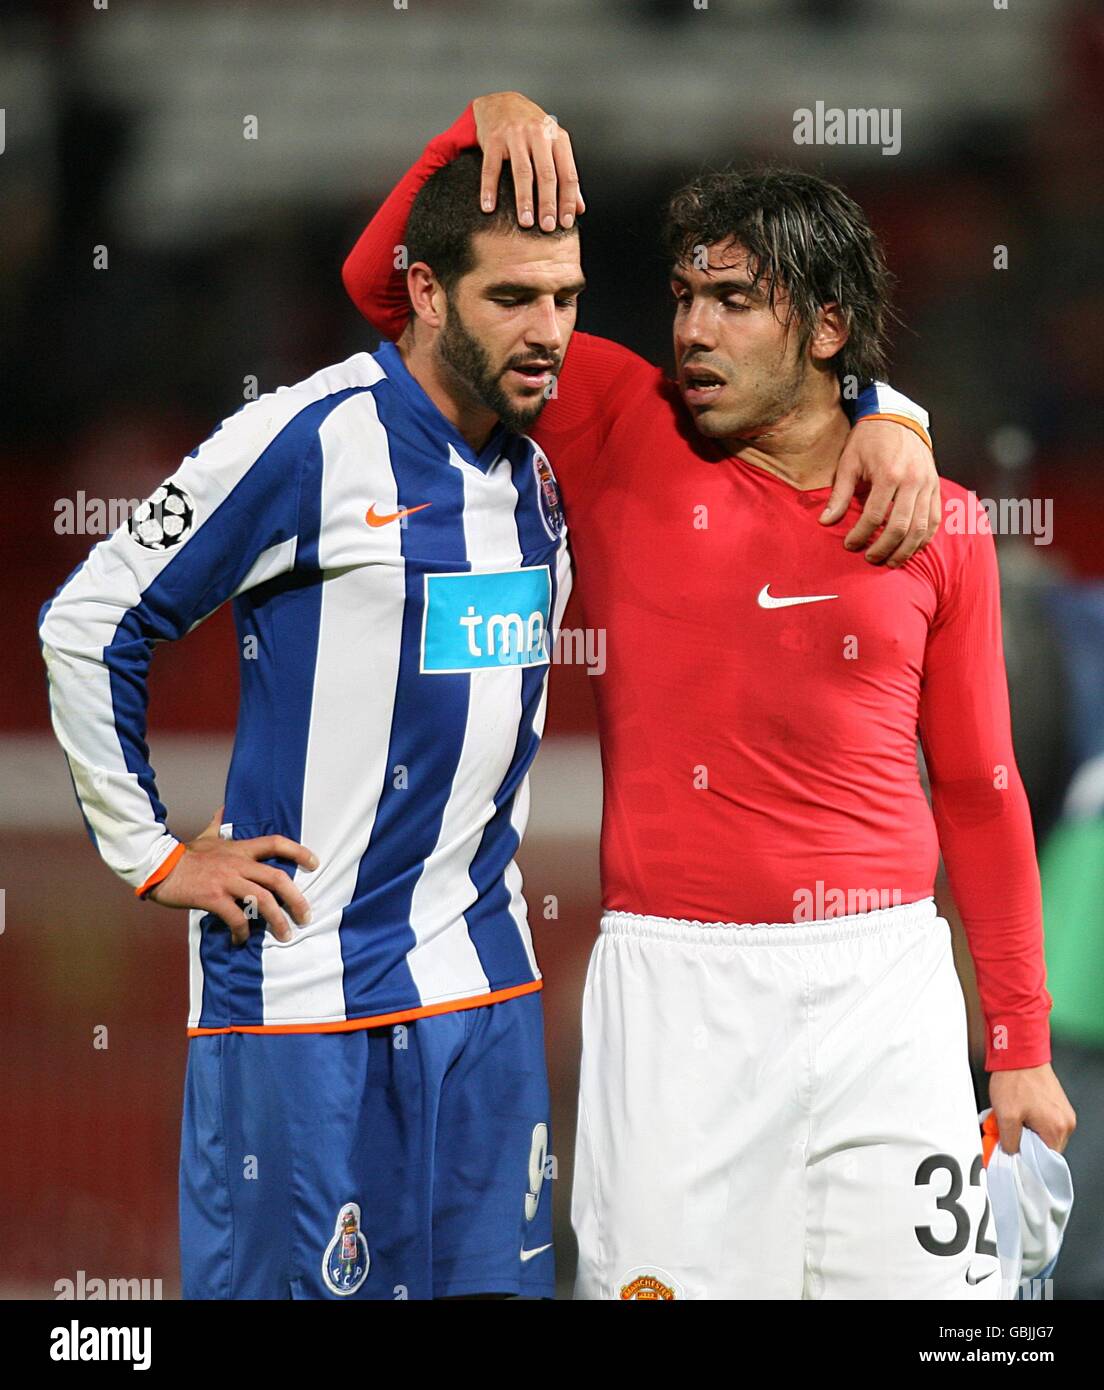 Soccer - UEFA Champions League - Quarter Final - First Leg - Manchester United v FC Porto - Old Trafford. FC Porto's Lisandro Lopez (left) and Manchester United's Carlos Tevez (rigth) after the final whistle. Stock Photo